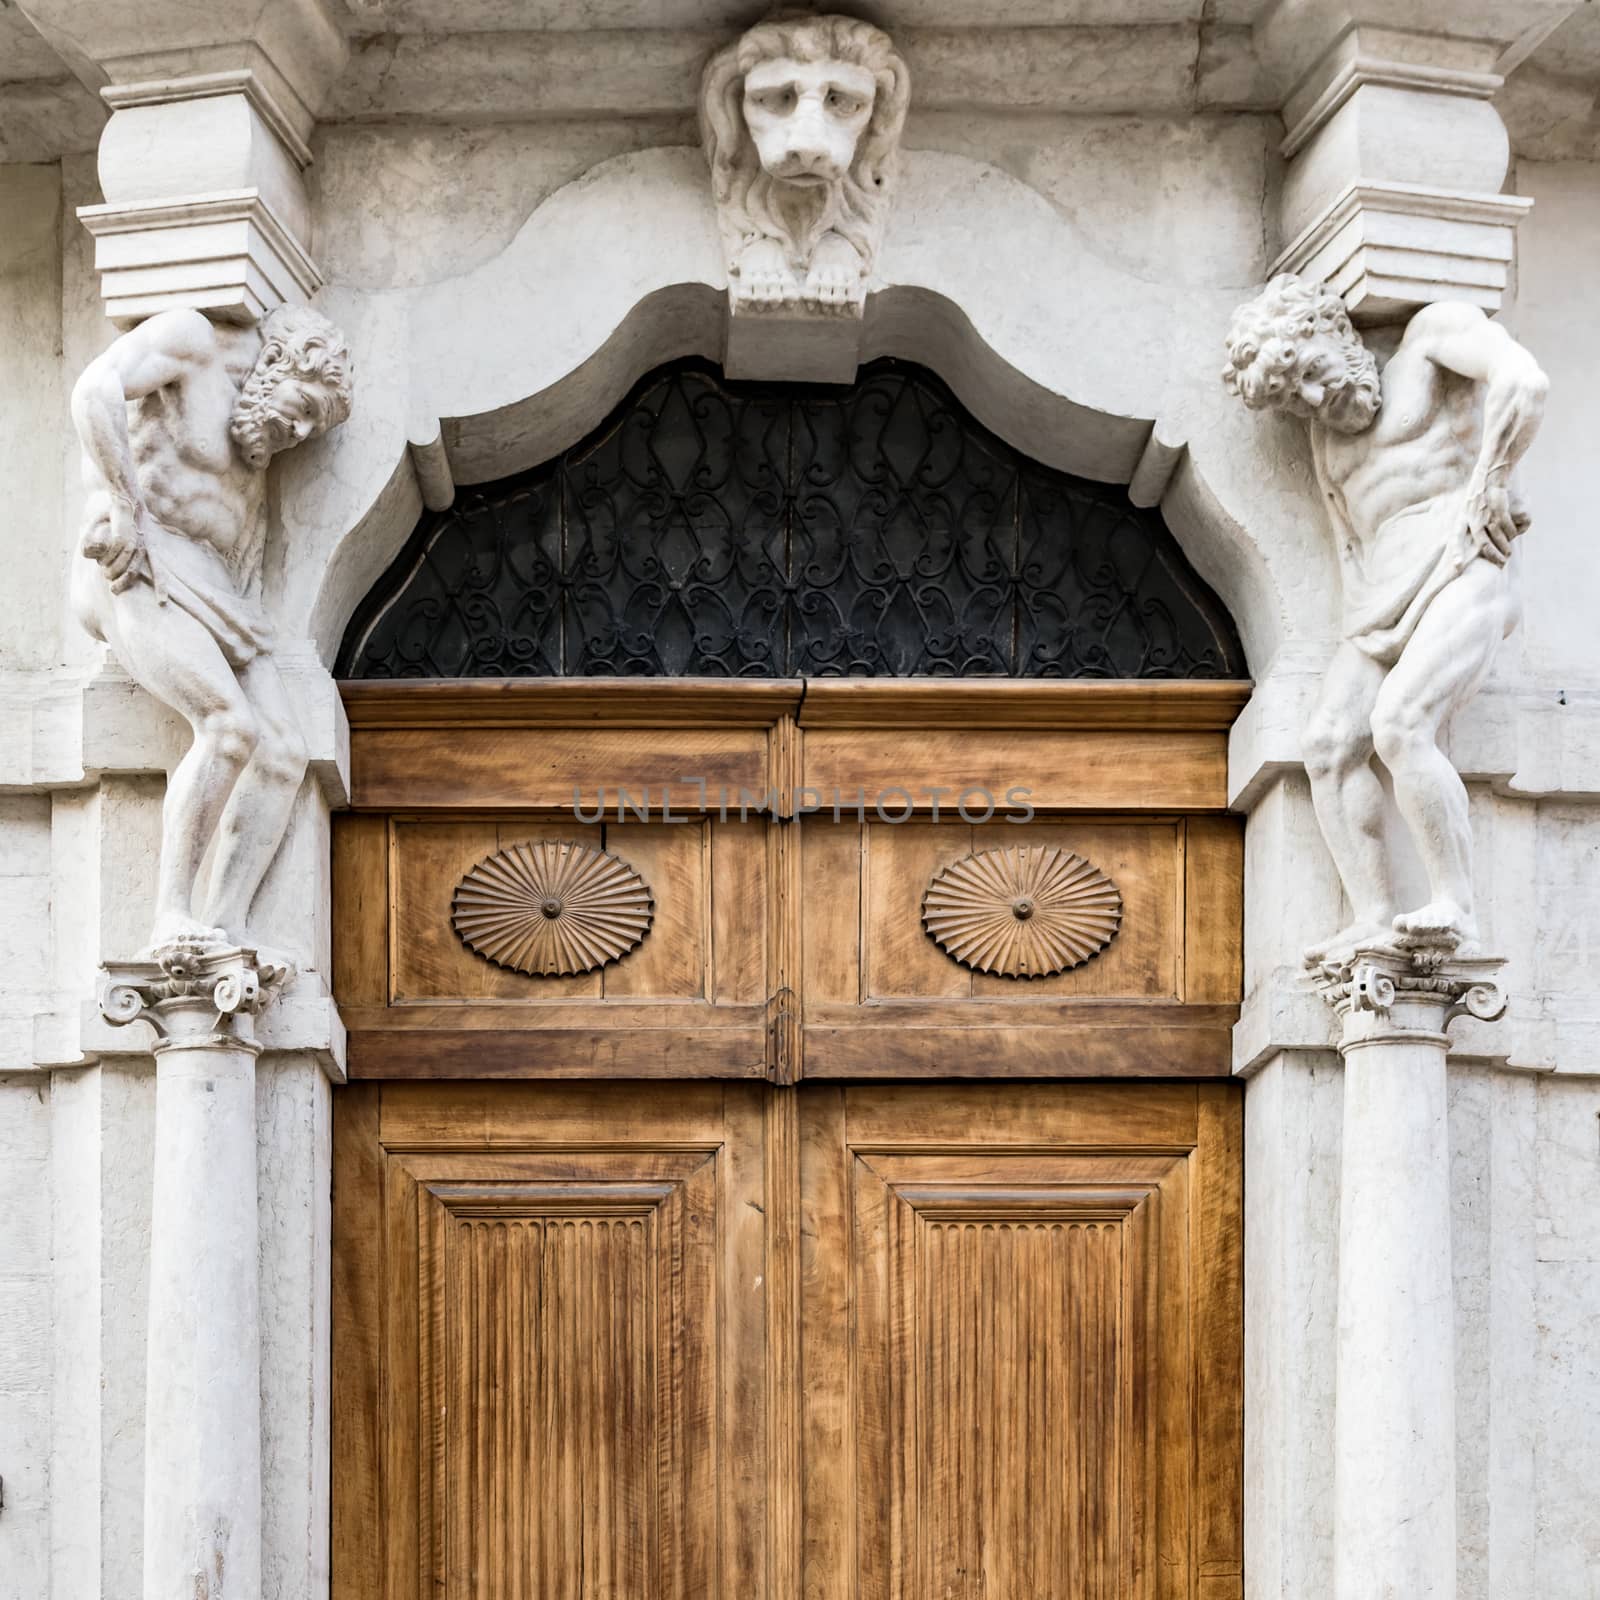 Old white stone entrance and wooden portal with statues that support the side columns.